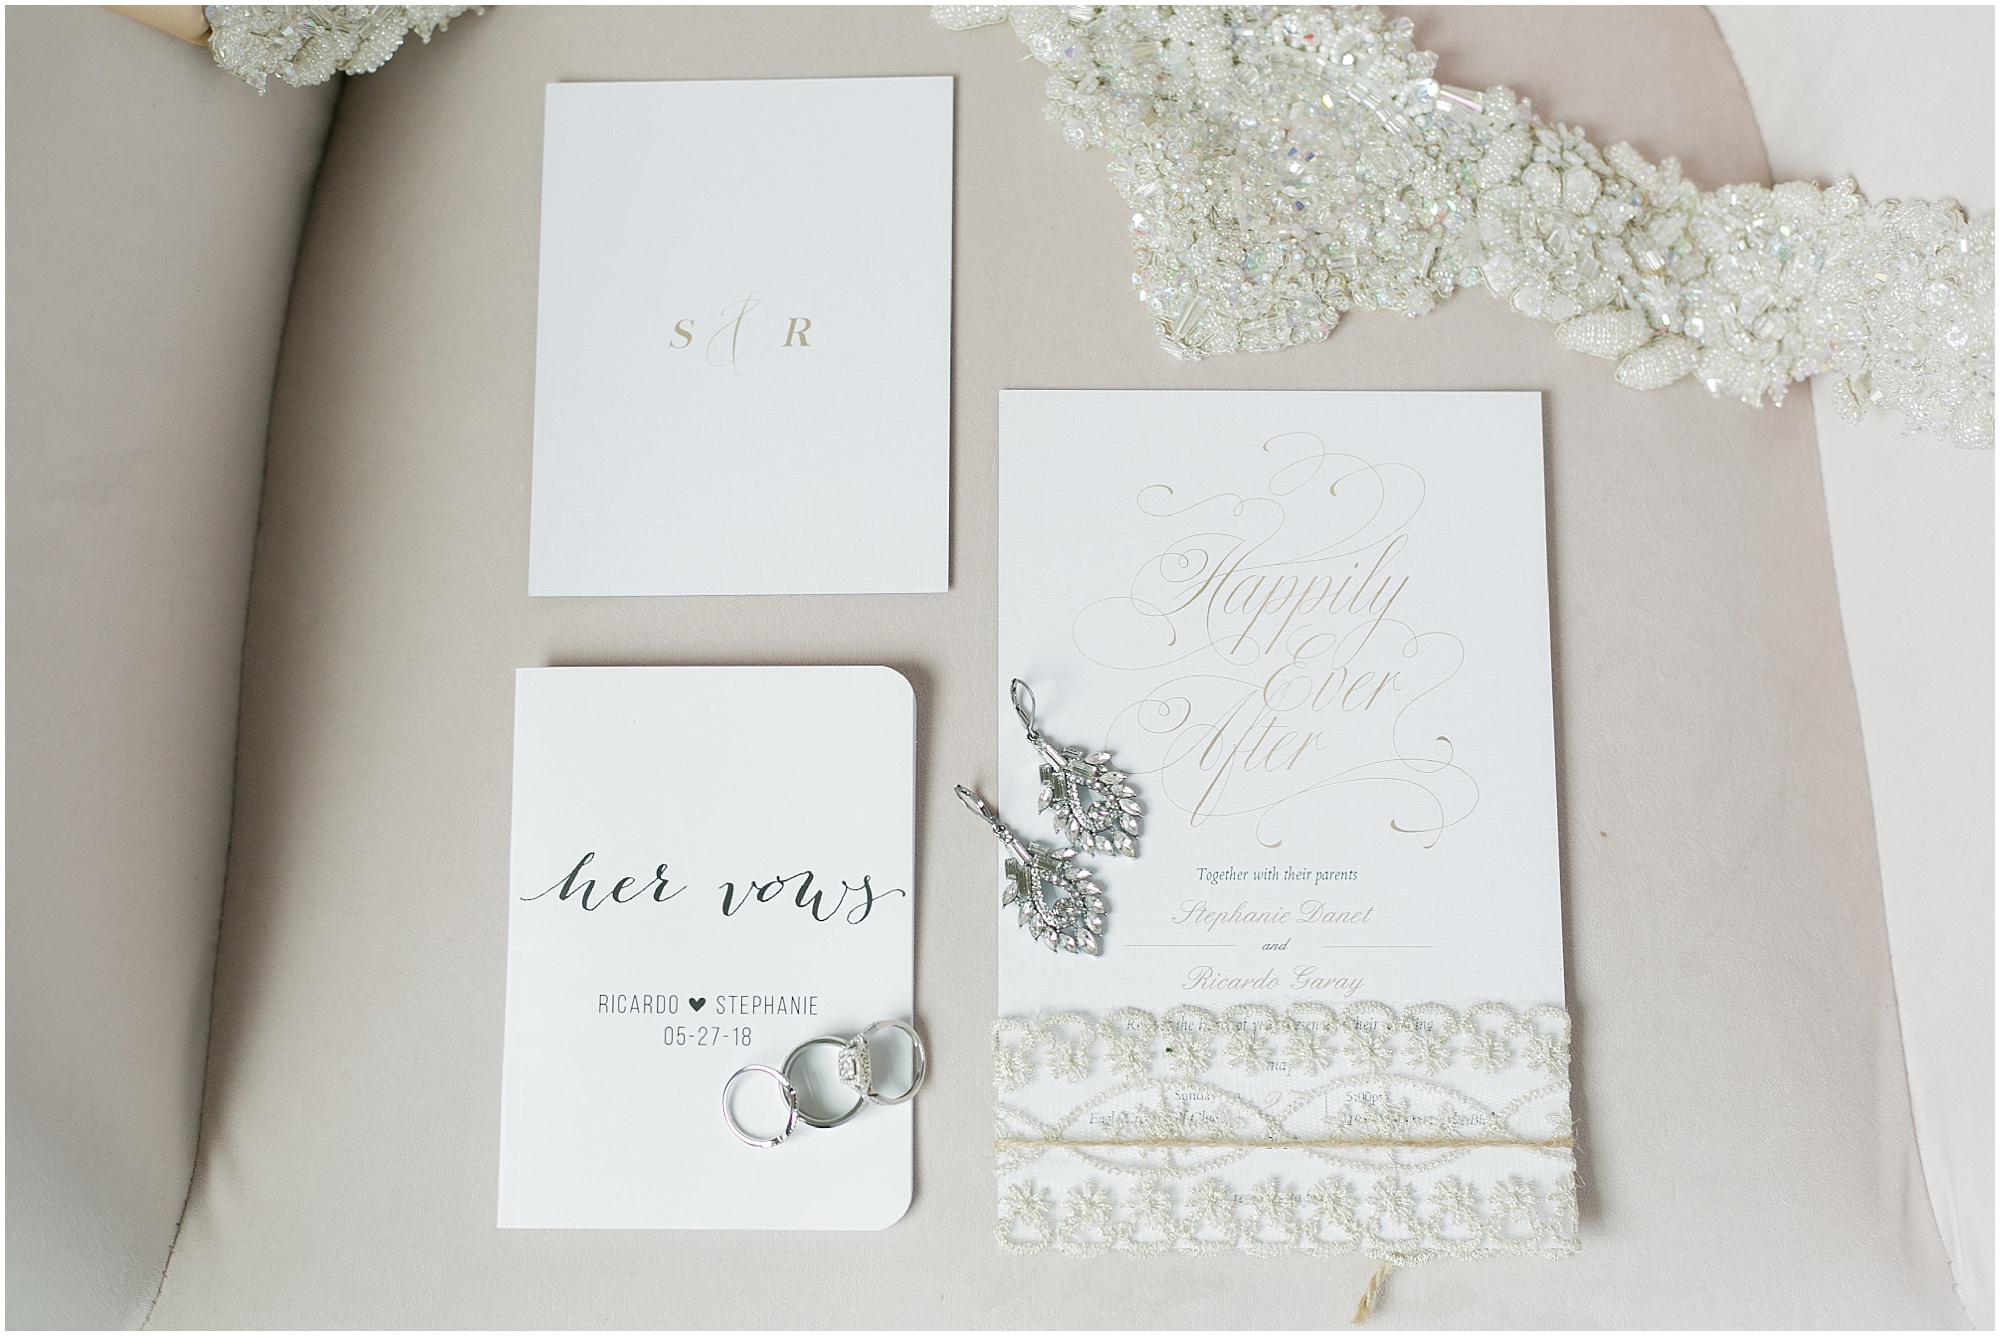 Happily ever after wedding invitation and vows along with some bridal jewelry.